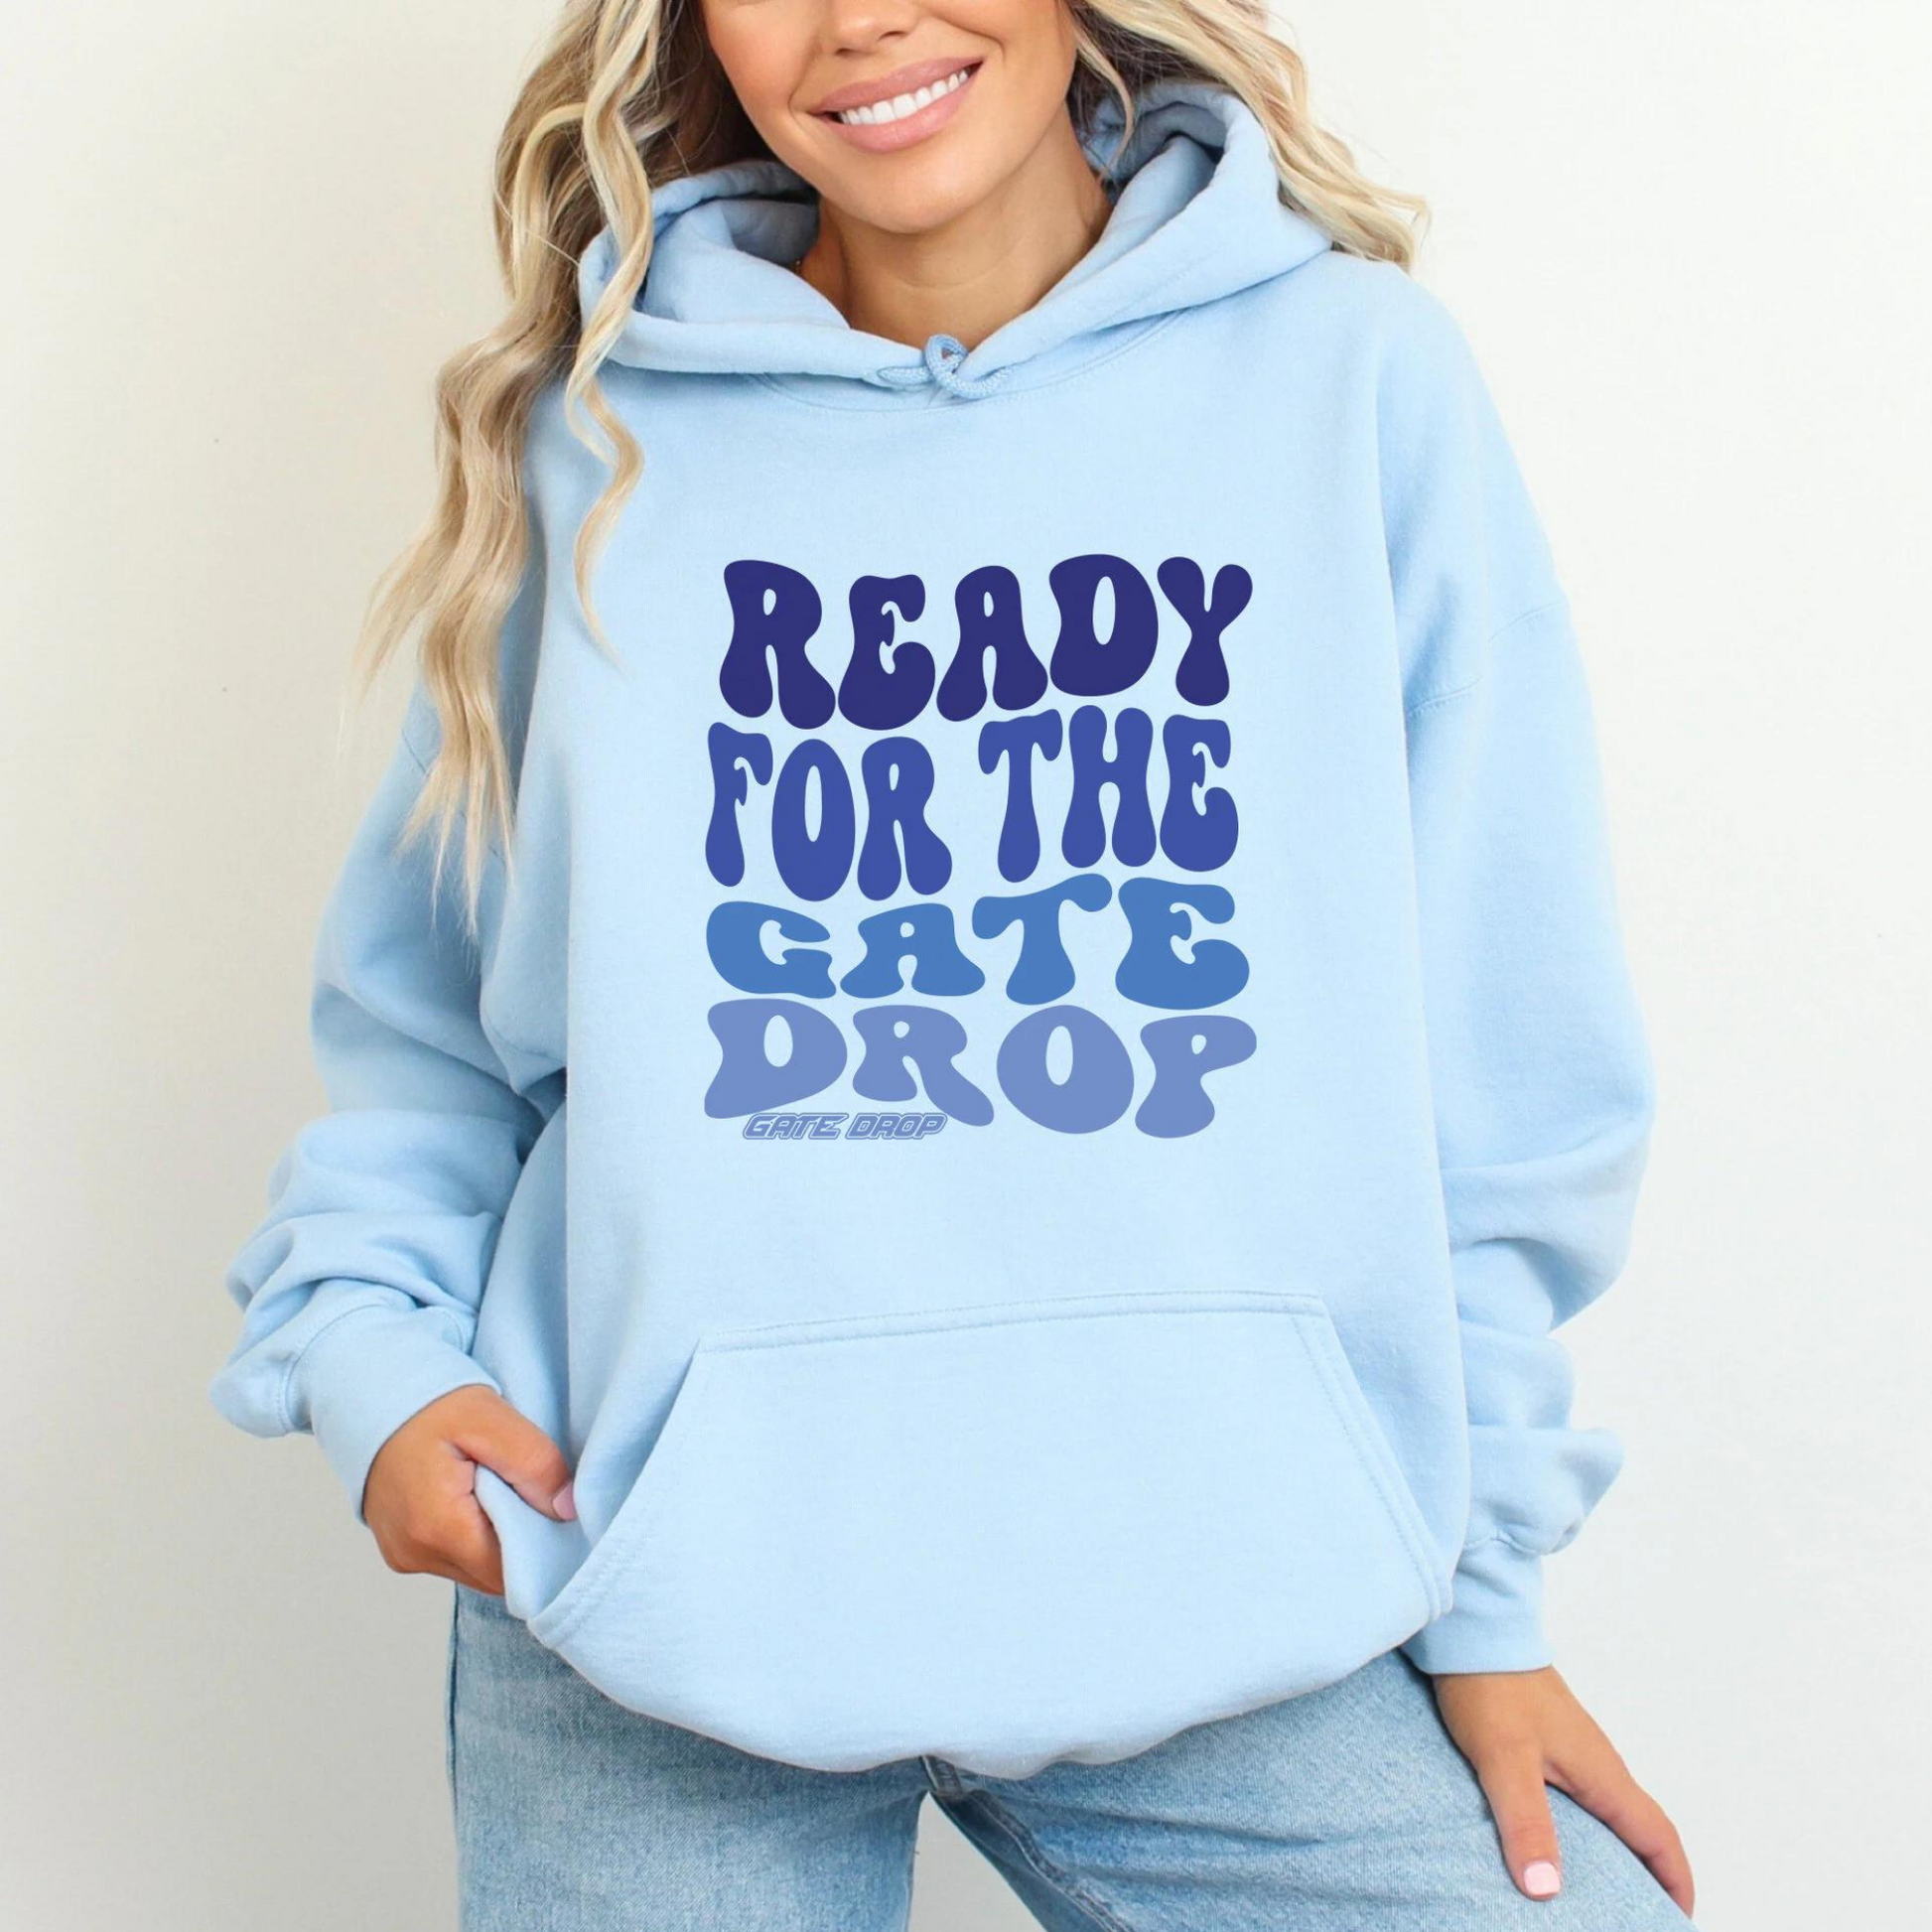 Ready For The Gate Drop Motocross Blue Print Hoodie